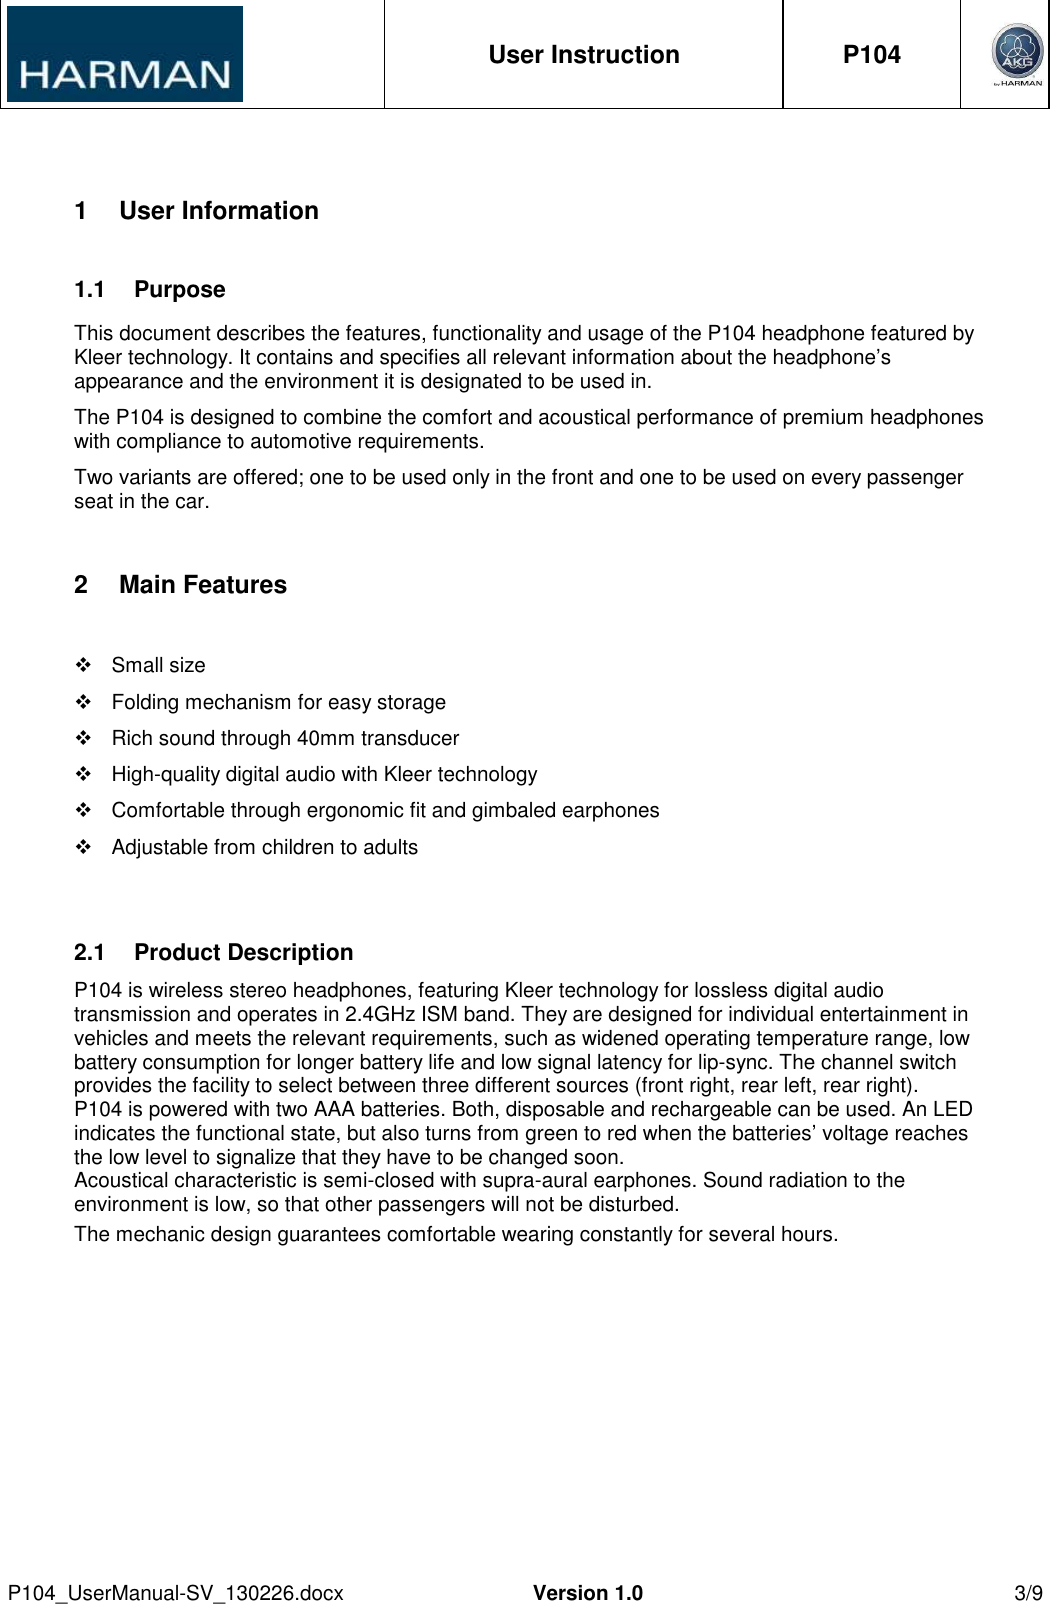  User Instruction  P104     P104_UserManual-SV_130226.docx  Version 1.0  3/9  1  User Information 1.1  Purpose This document describes the features, functionality and usage of the P104 headphone featured by Kleer technology. It contains and specifies all relevant information about the headphone’s appearance and the environment it is designated to be used in. The P104 is designed to combine the comfort and acoustical performance of premium headphones with compliance to automotive requirements. Two variants are offered; one to be used only in the front and one to be used on every passenger seat in the car. 2  Main Features    Small size   Folding mechanism for easy storage   Rich sound through 40mm transducer   High-quality digital audio with Kleer technology   Comfortable through ergonomic fit and gimbaled earphones   Adjustable from children to adults  2.1  Product Description  P104 is wireless stereo headphones, featuring Kleer technology for lossless digital audio transmission and operates in 2.4GHz ISM band. They are designed for individual entertainment in vehicles and meets the relevant requirements, such as widened operating temperature range, low battery consumption for longer battery life and low signal latency for lip-sync. The channel switch provides the facility to select between three different sources (front right, rear left, rear right). P104 is powered with two AAA batteries. Both, disposable and rechargeable can be used. An LED indicates the functional state, but also turns from green to red when the batteries’ voltage reaches the low level to signalize that they have to be changed soon. Acoustical characteristic is semi-closed with supra-aural earphones. Sound radiation to the environment is low, so that other passengers will not be disturbed. The mechanic design guarantees comfortable wearing constantly for several hours. 